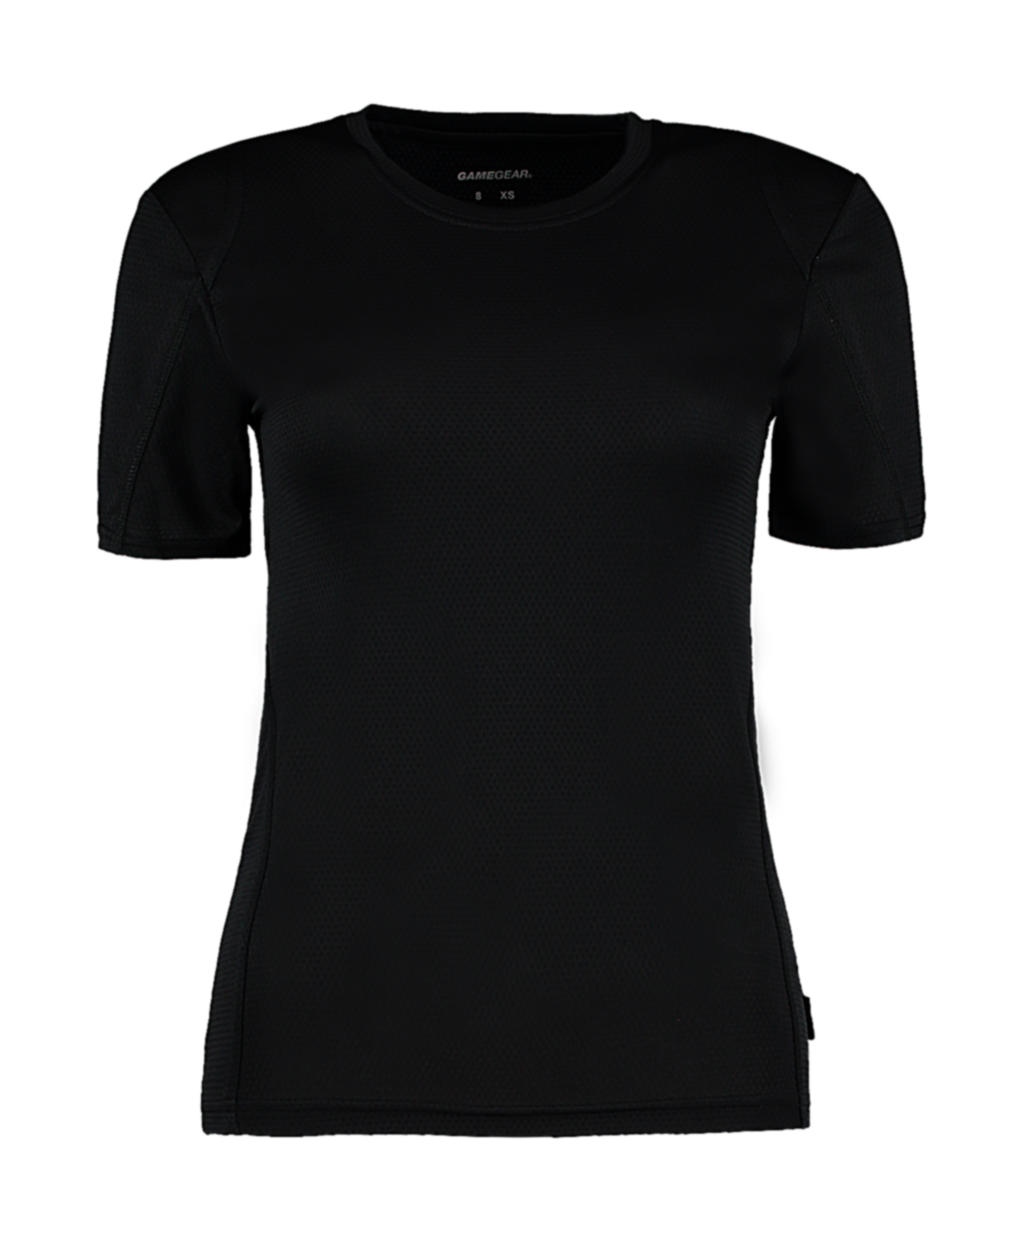  Womens Regular Fit Cooltex? Contrast Tee in Farbe Black/Black